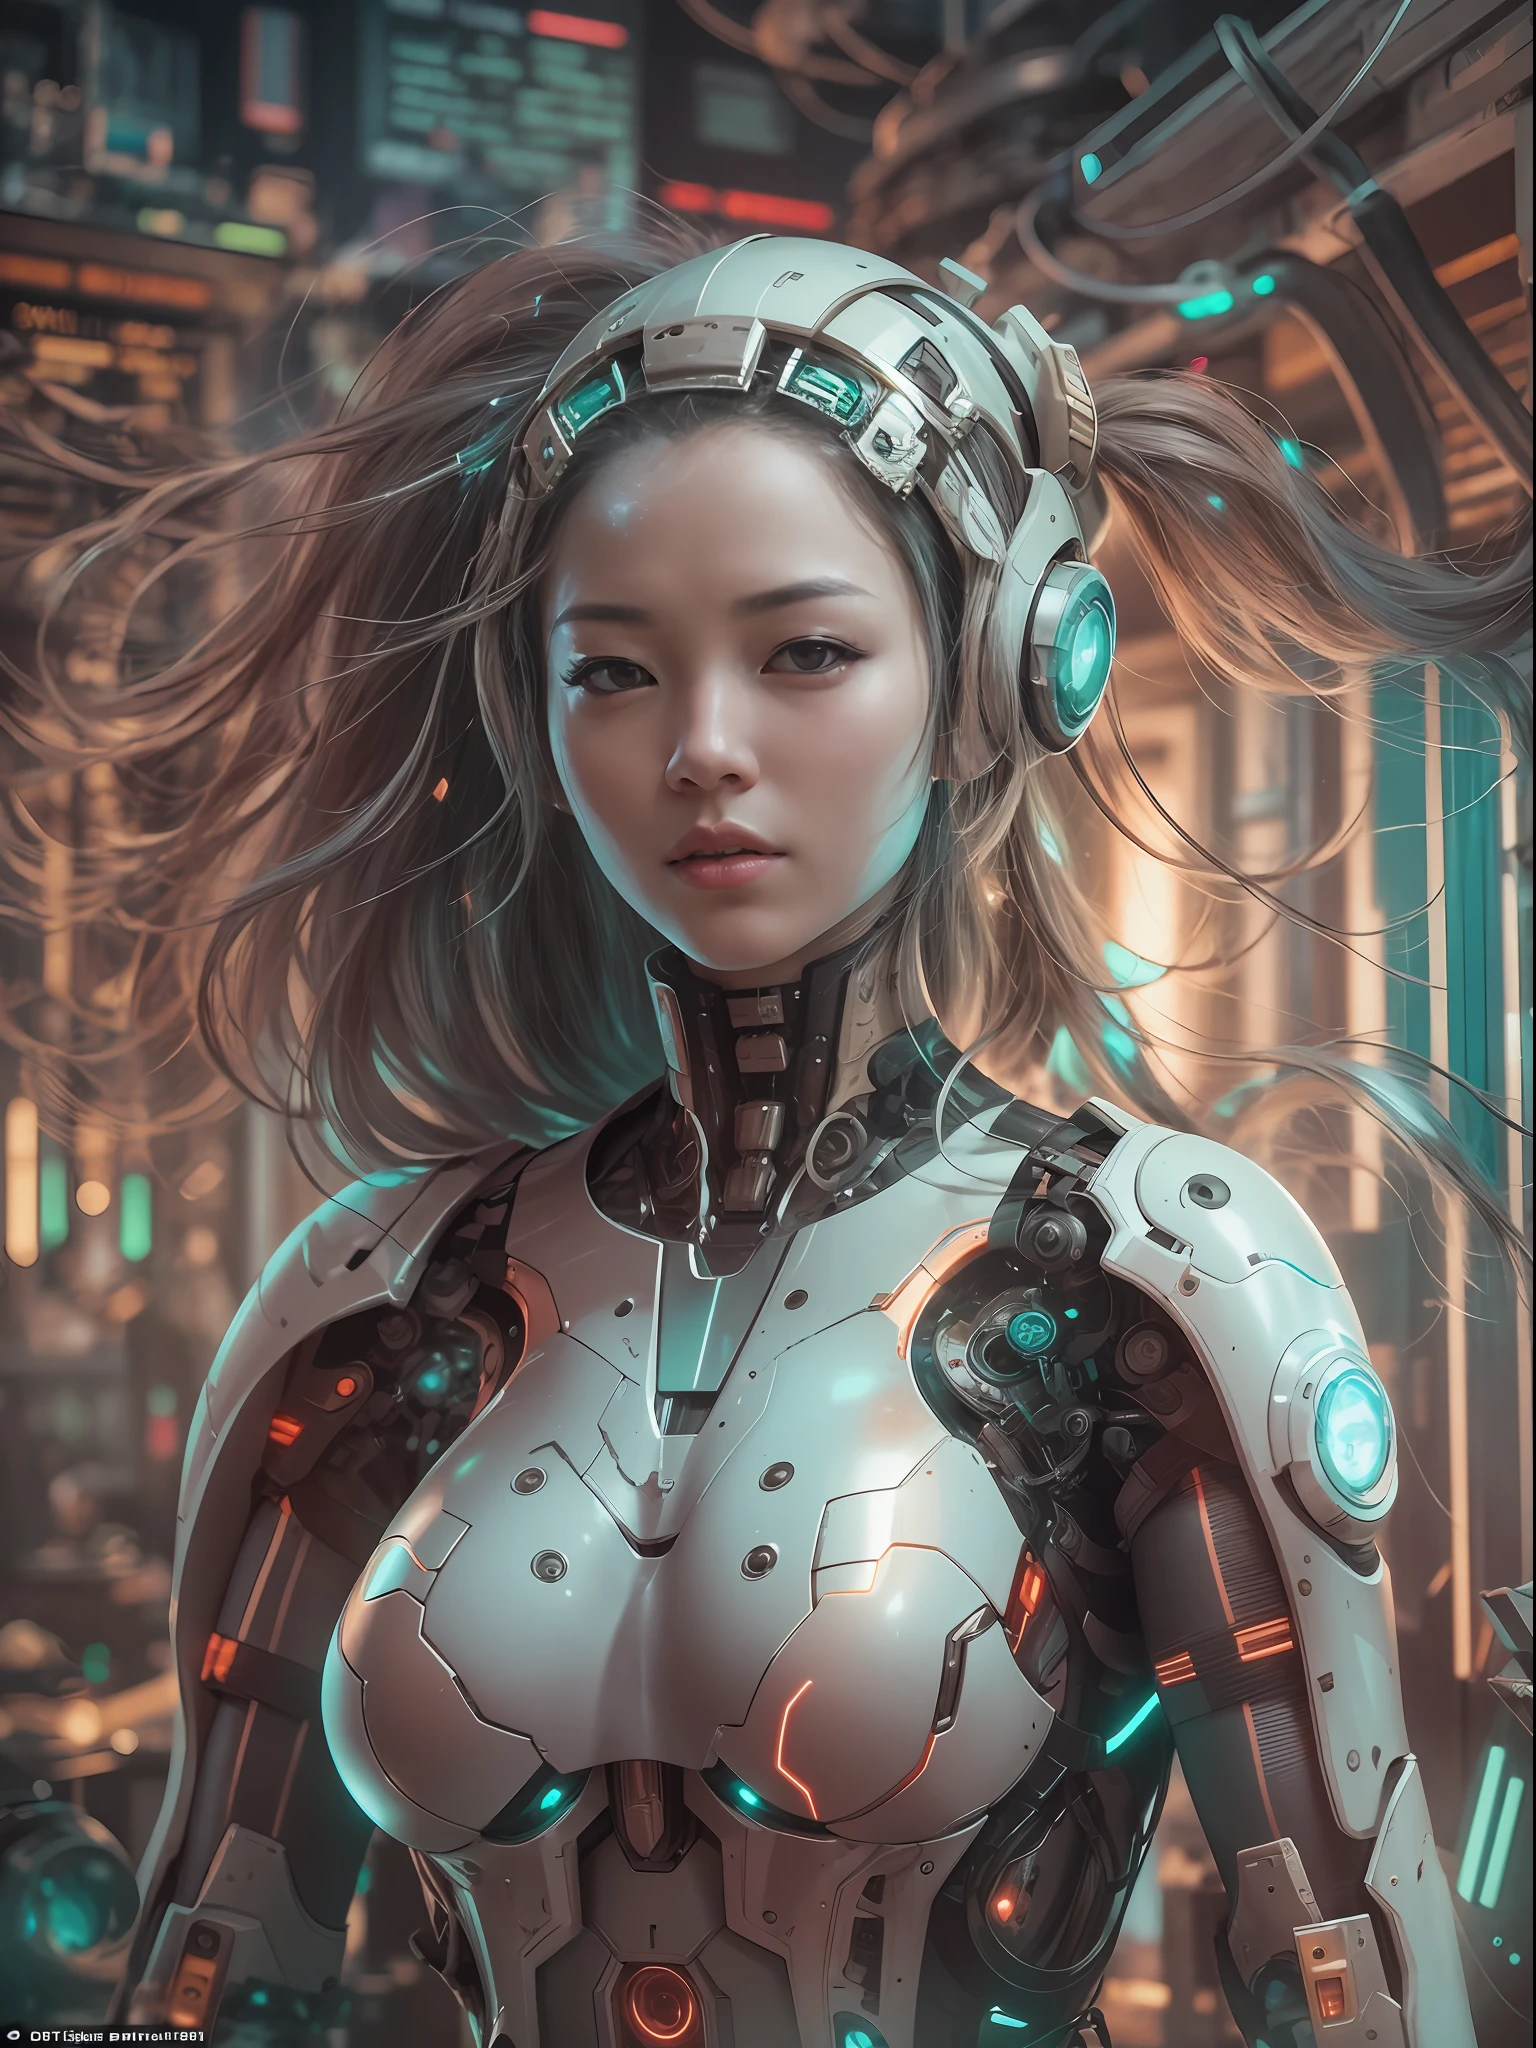 In this breathtaking 8K portrait photo, a beautiful cyborg robot girl in the style of "Goddess of Victory Nikke" captivates with intricate and elegant details. Her skin is formed by digital optical fiber, creating a mesmerizing effect under soft and volumetric lighting. This concept art by the talented artists Otomo Katsuhiro, Hyung-tae Kim, and Oshii Mamoru combines cyberpunk, sci-fi, and fantasy elements with smooth and sharp focus. The comic illustration style adds to the highly detailed and visually stunning portrayal of this futuristic character